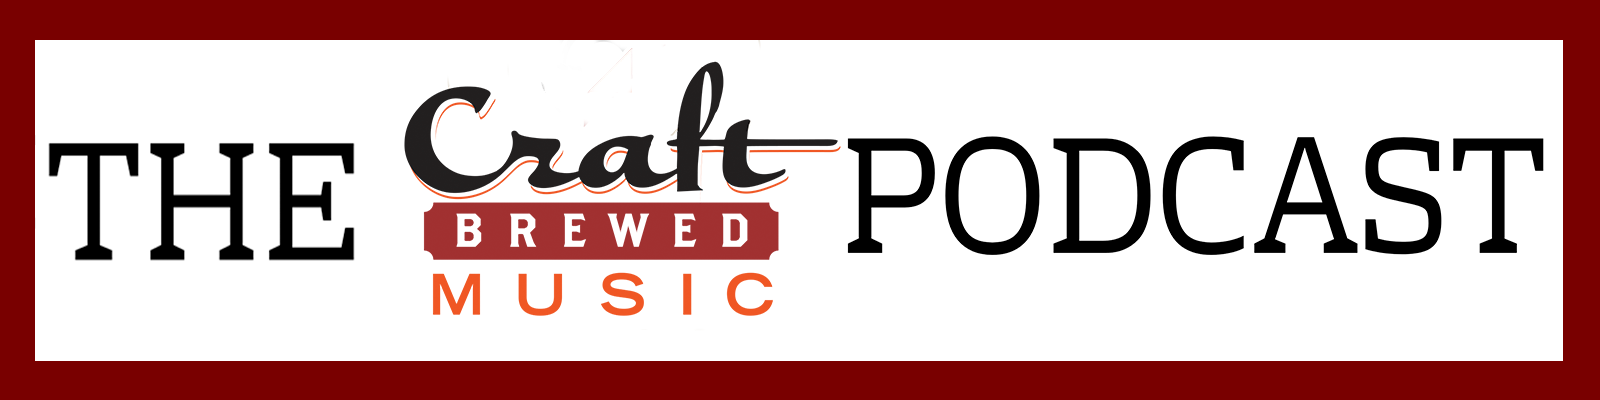 The Craft Brewed Music Podcast